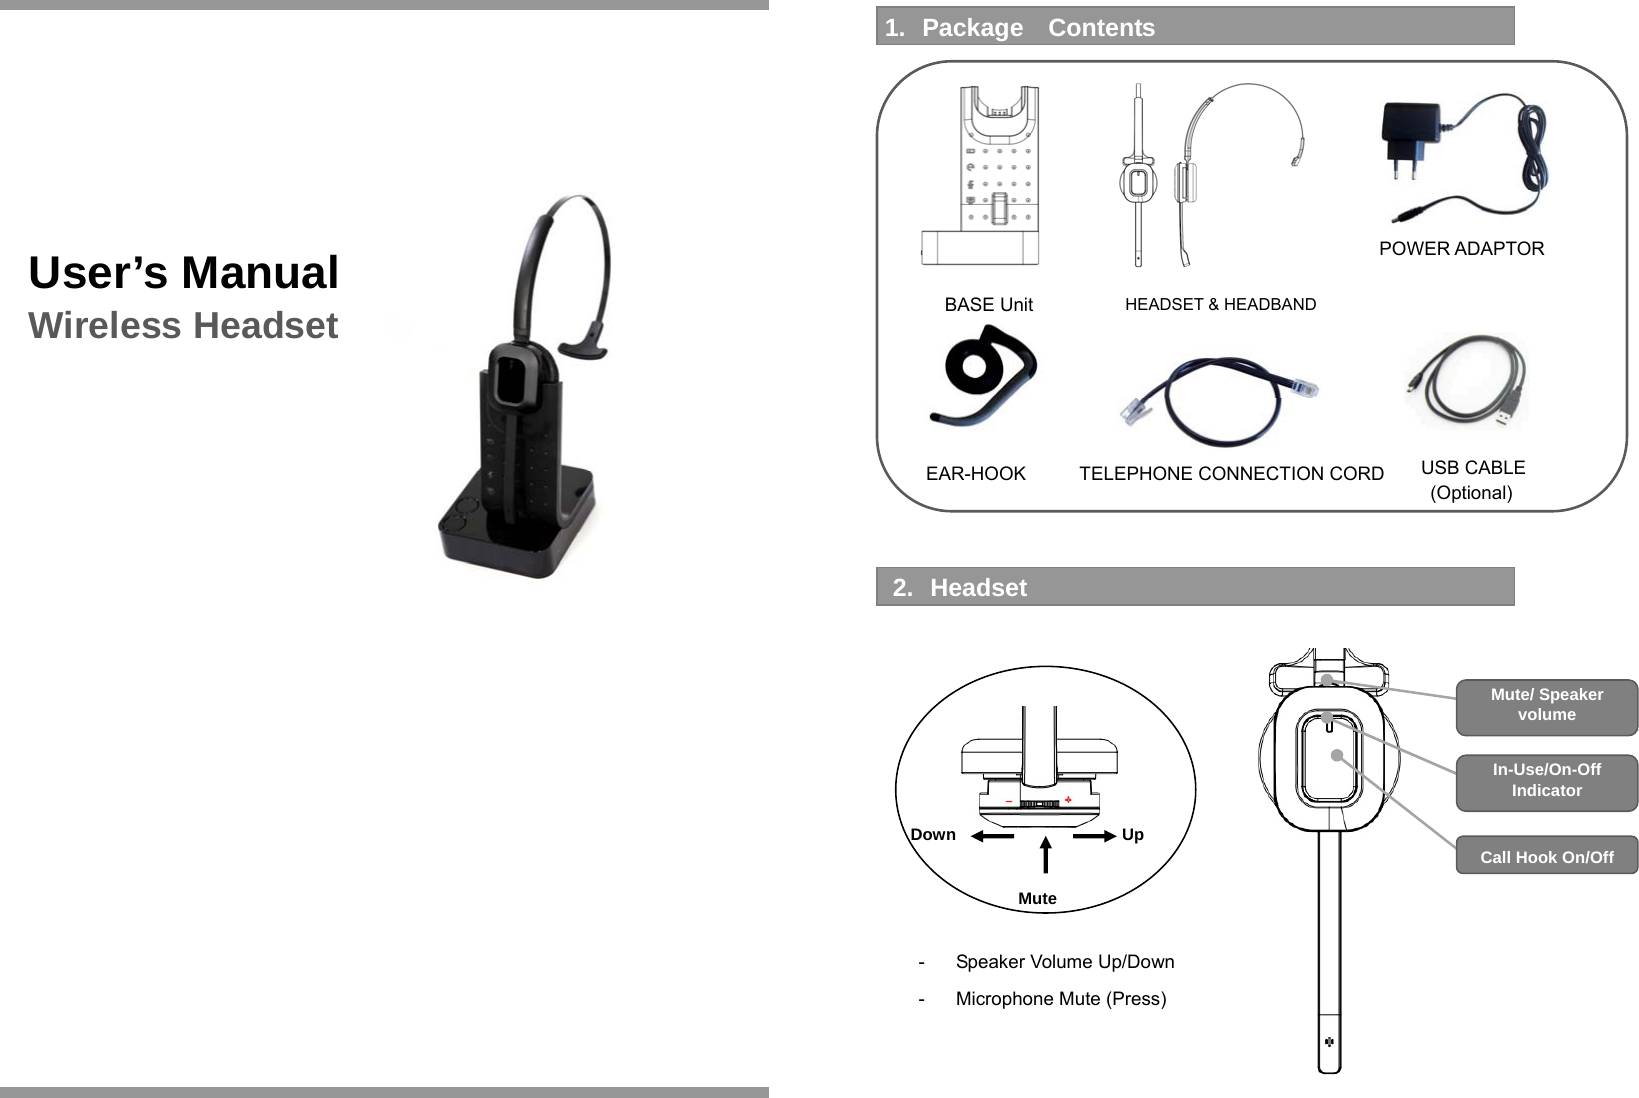                           User’s Manual Wireless Headset INTRODUCTION                         -  Speaker Volume Up/Down -  Microphone Mute (Press)   1. Package  Contents BASE Unit  HEADSET &amp; HEADBAND   EAR-HOOK  TELEPHONE CONNECTION CORD2. Headset   POWER ADAPTOR Down Up Mute/ Speaker volume Call Hook On/Off In-Use/On-Off Indicator Mute    USB CABLE (Optional) 